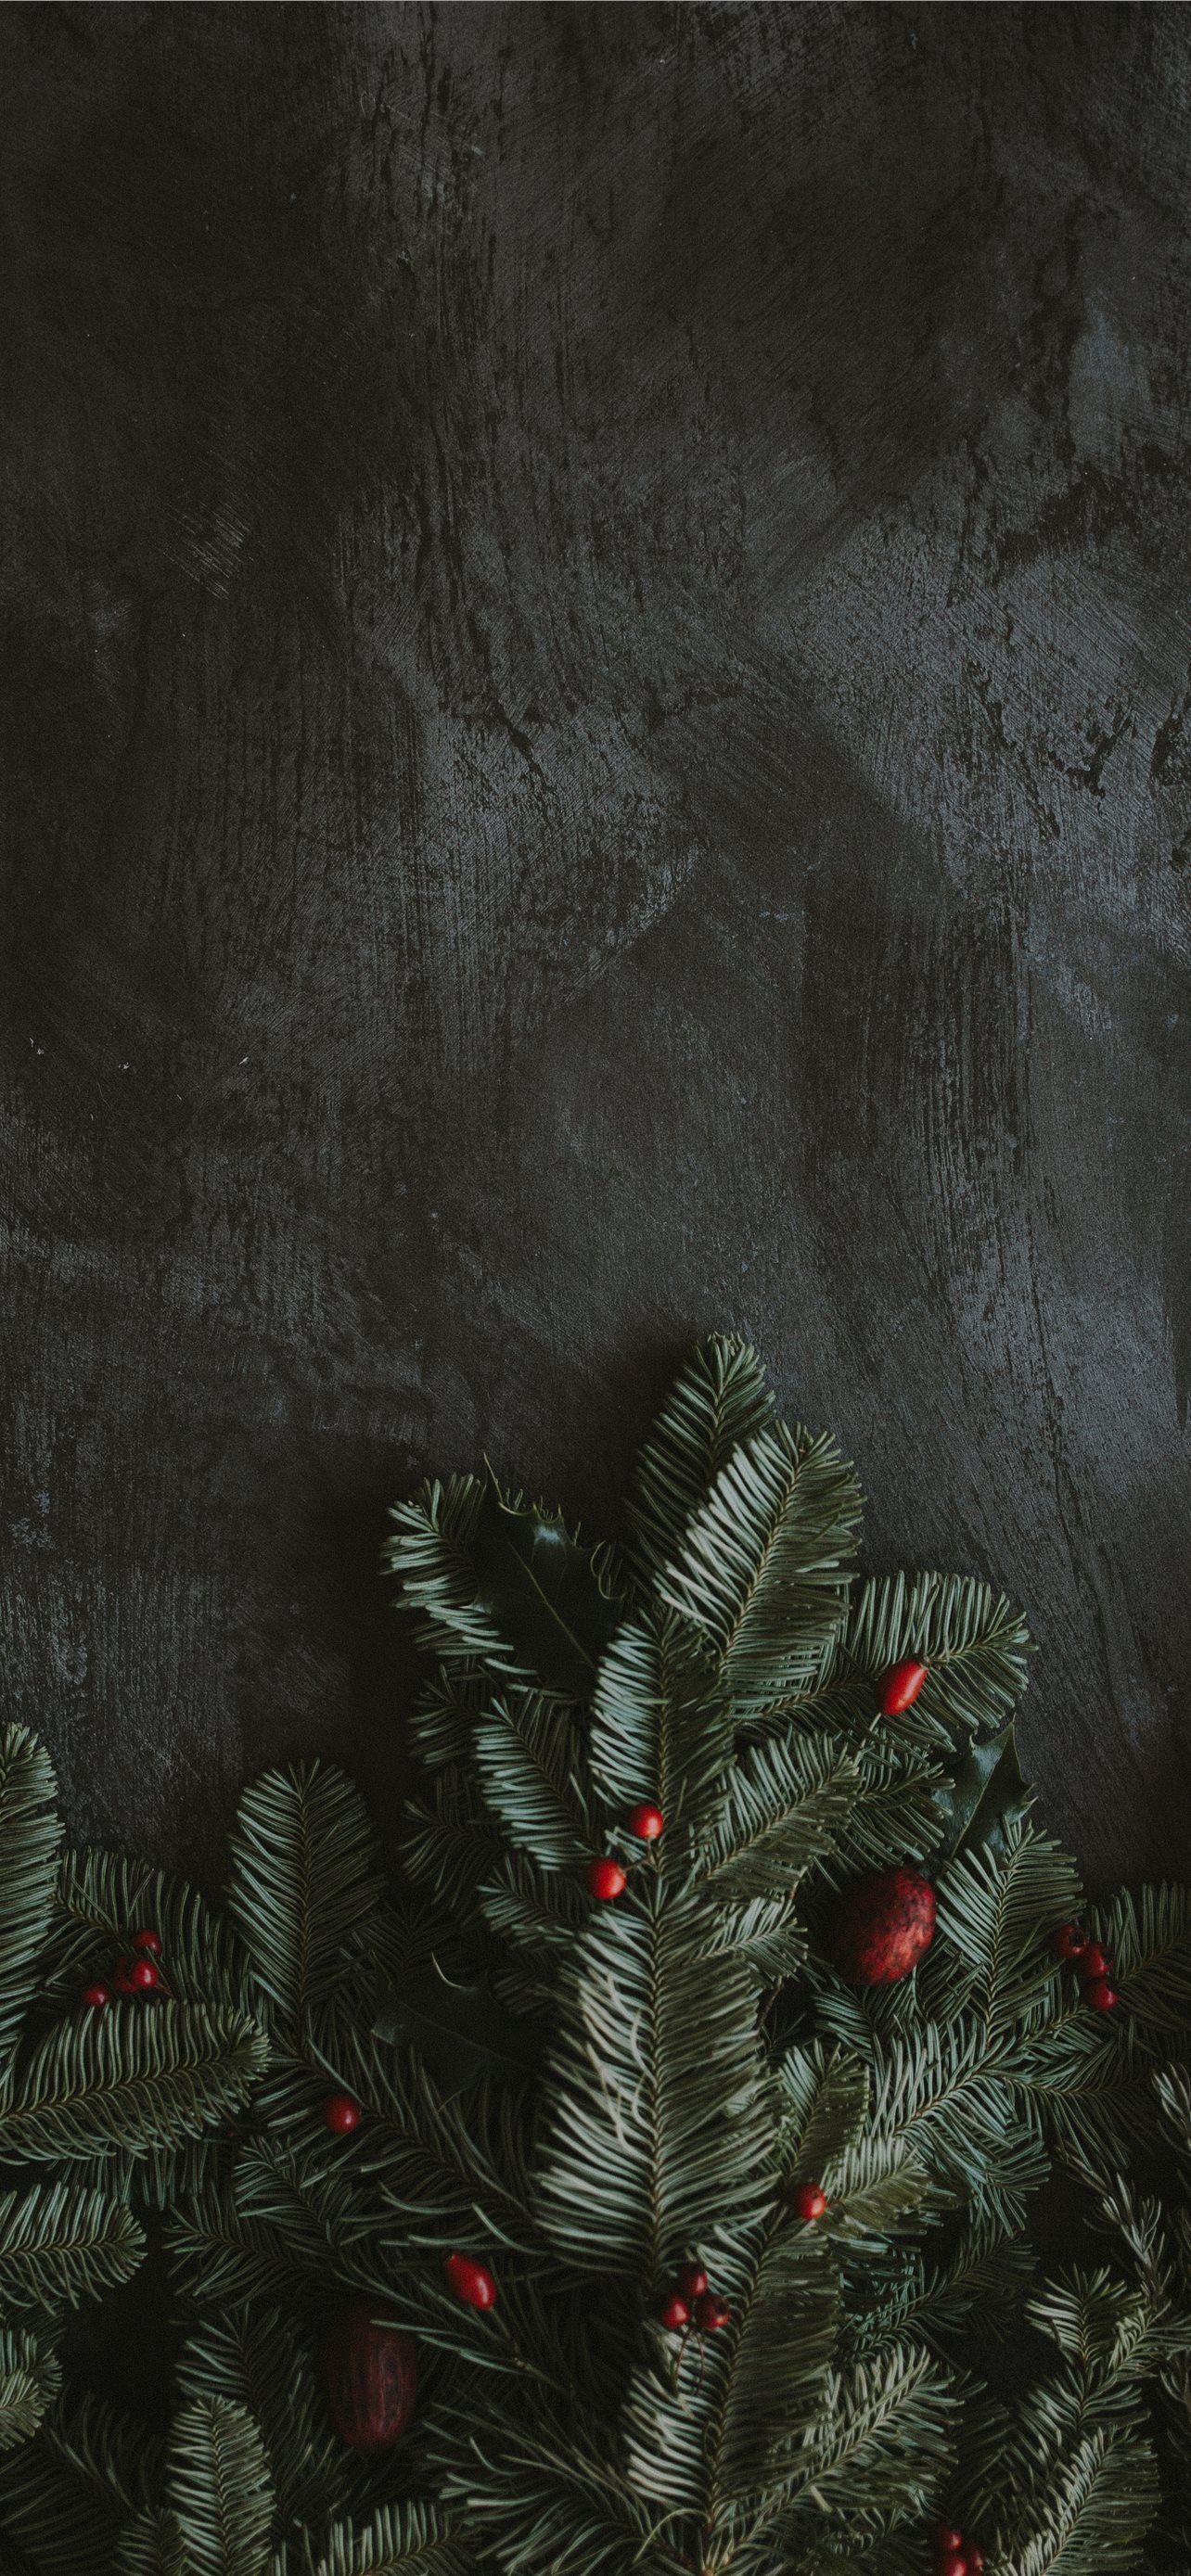 A dark and moody Christmas wallpaper with a pine branch - Christmas iPhone